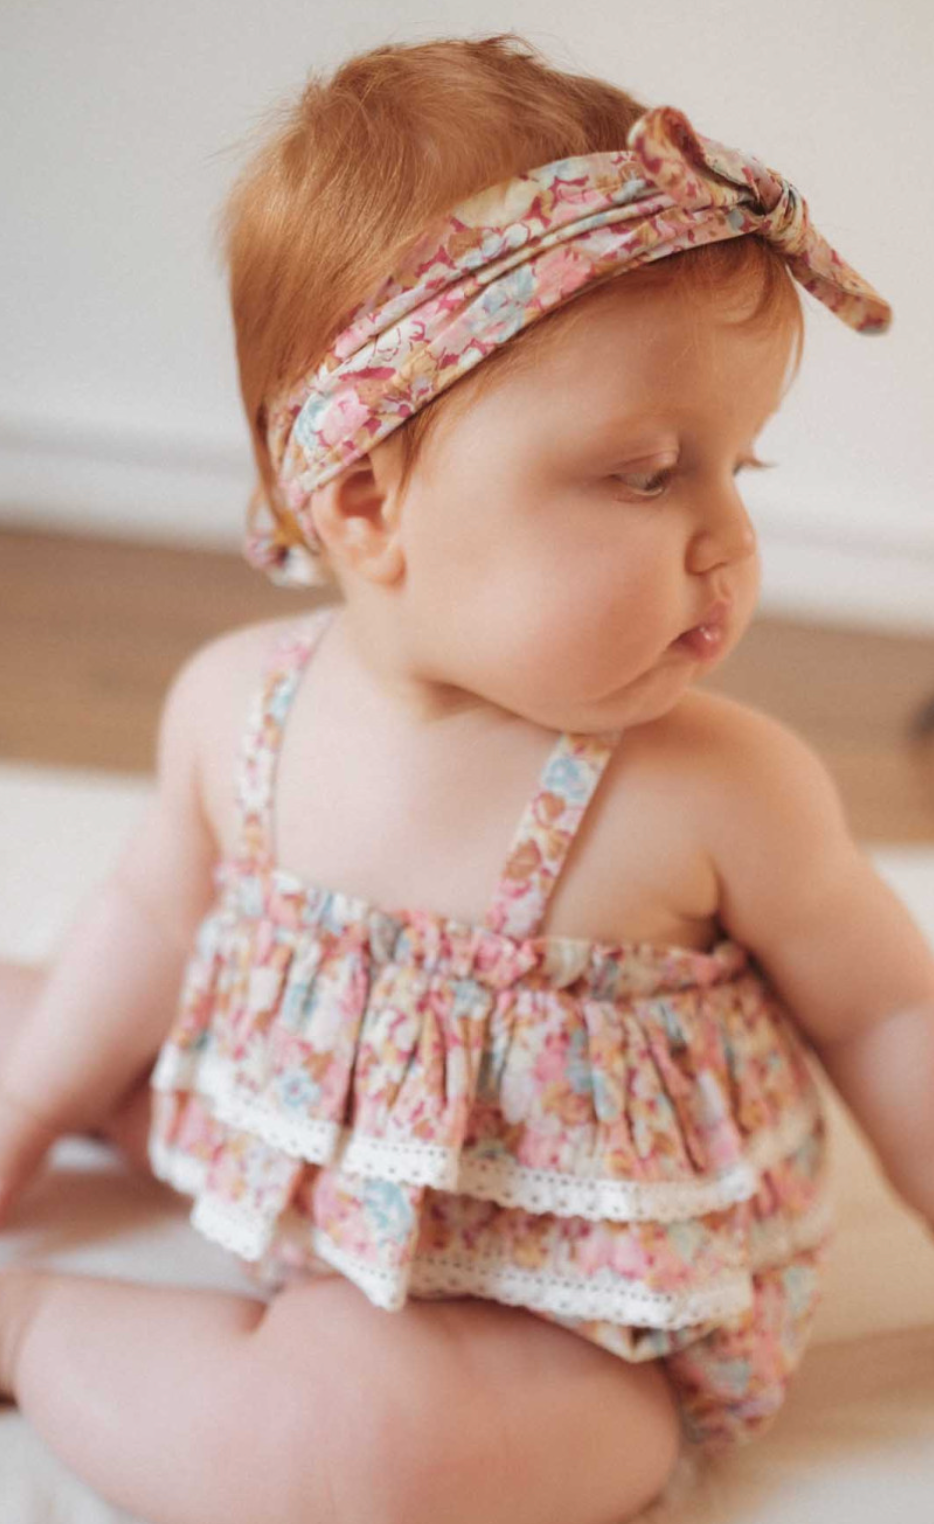 Louise Misha Kumal Romper in sweet pink pastel. A floral print romper adorned with lace edged ruffles that features adjustable, elasticized, straps crossed in the back, elasticized legs, and a crotch snap opening. Made with 100% organic cotton including the lining.